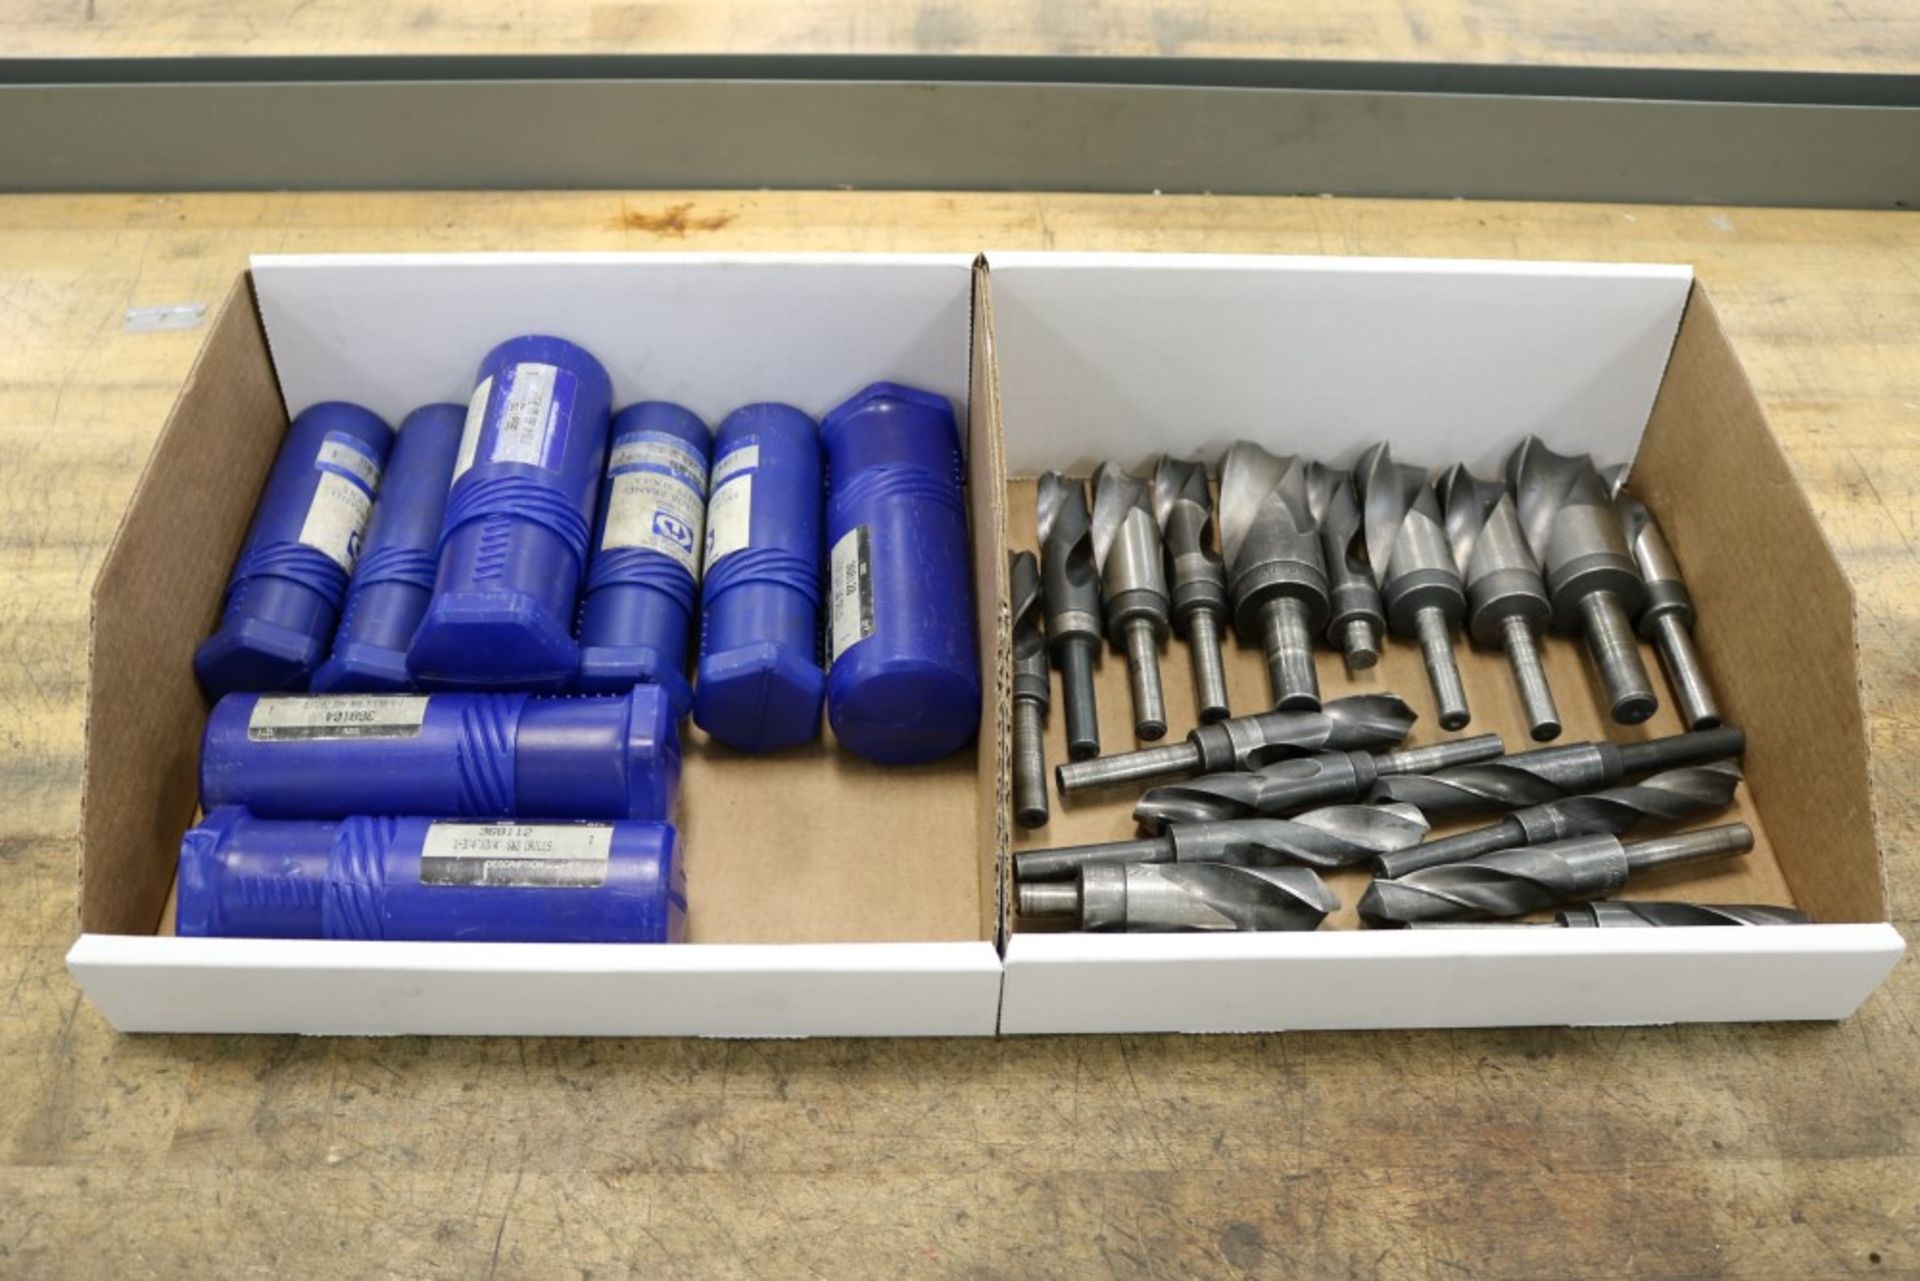 Drills - Various Box of Large Drill Bits 3/4" to 2-3/4"